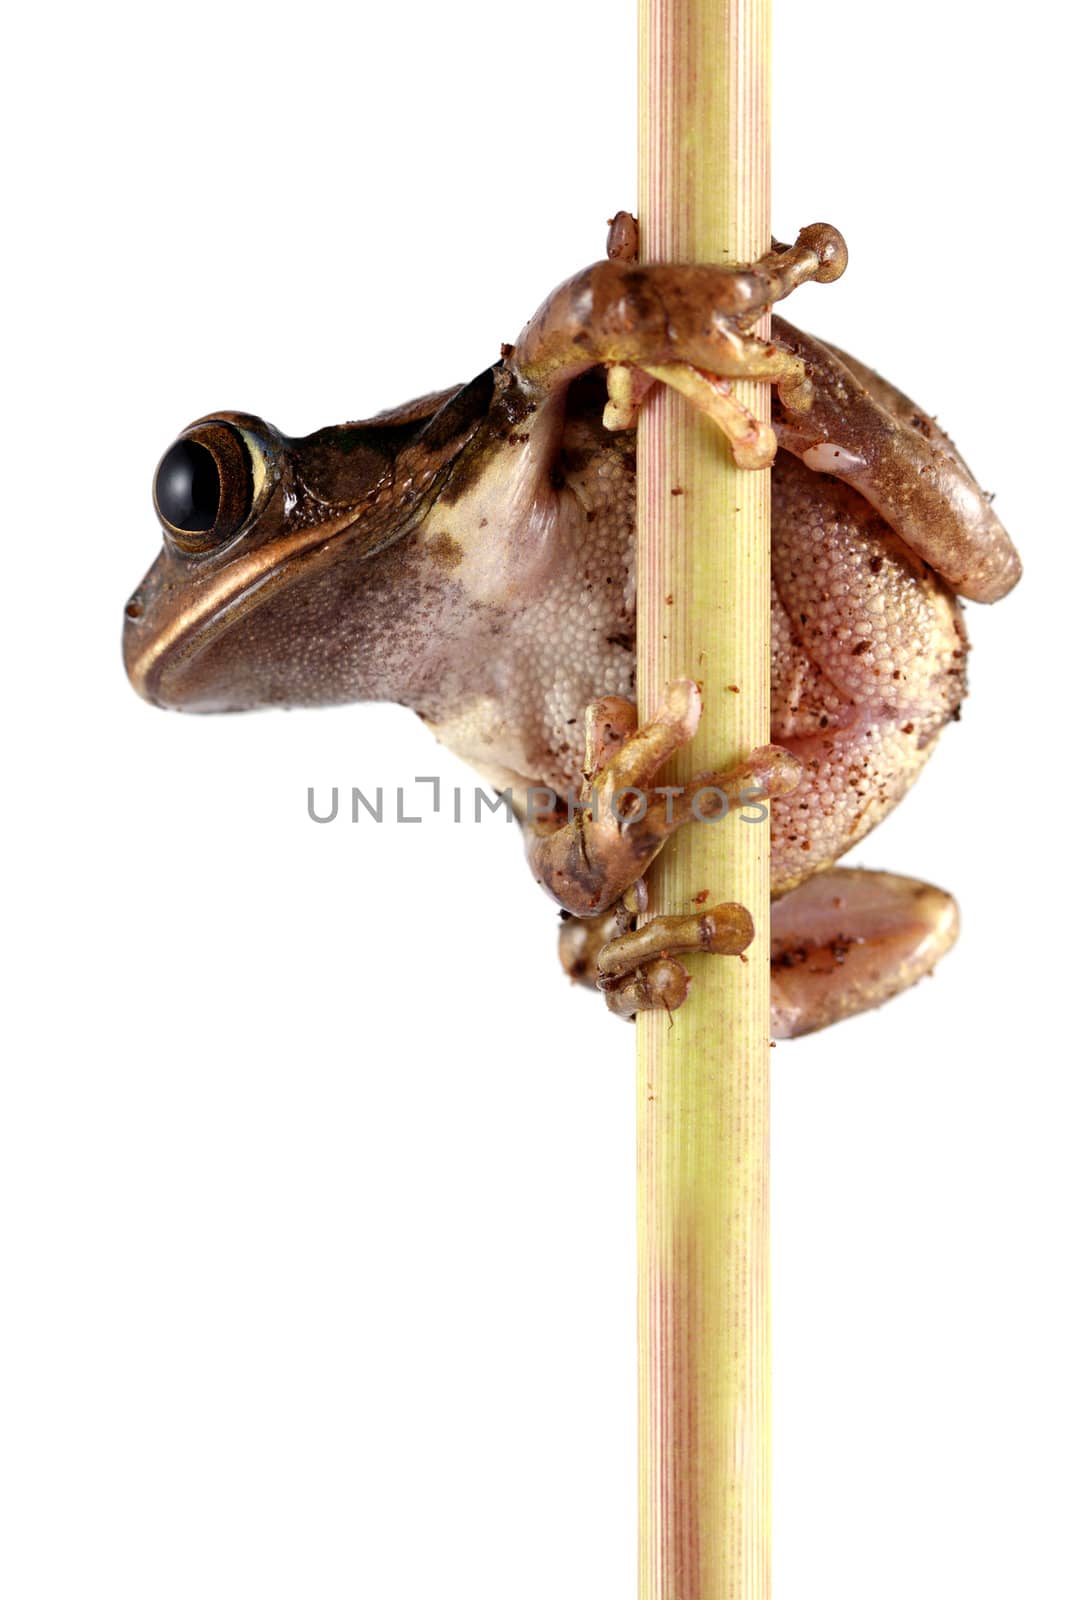 A Peacock Frog (Leptopelis vermiculatus) on a stem of a plant shot on a solid white background. Also known as the Big-eyed Tree Frog, this frog inhabits the tropical rainforests in the African country of Tanzania.